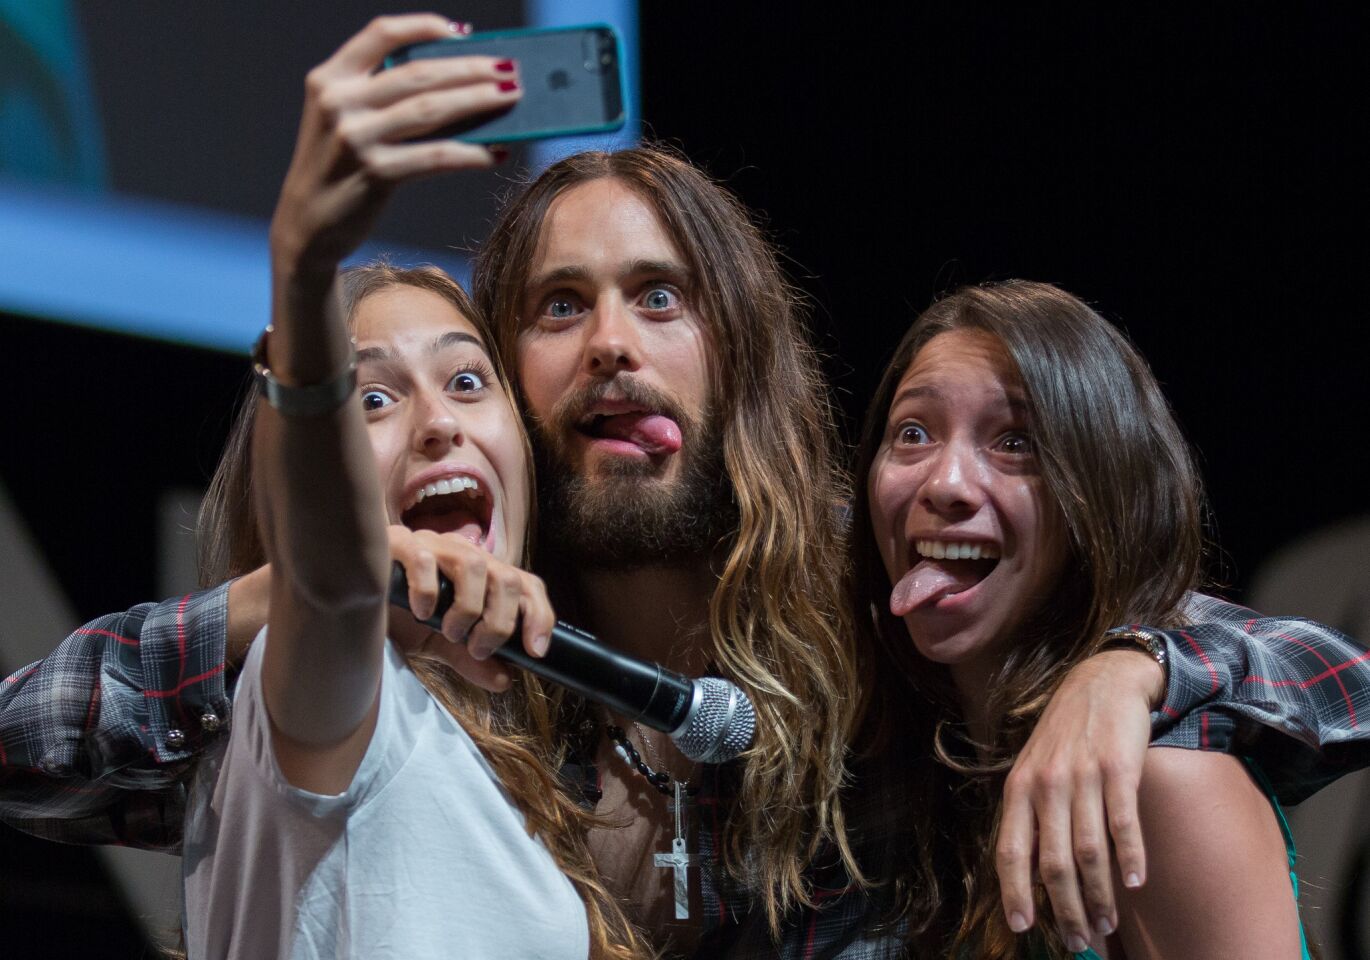 Jared Leto with fans at the 2014 Cannes Lions in Cannes, France.